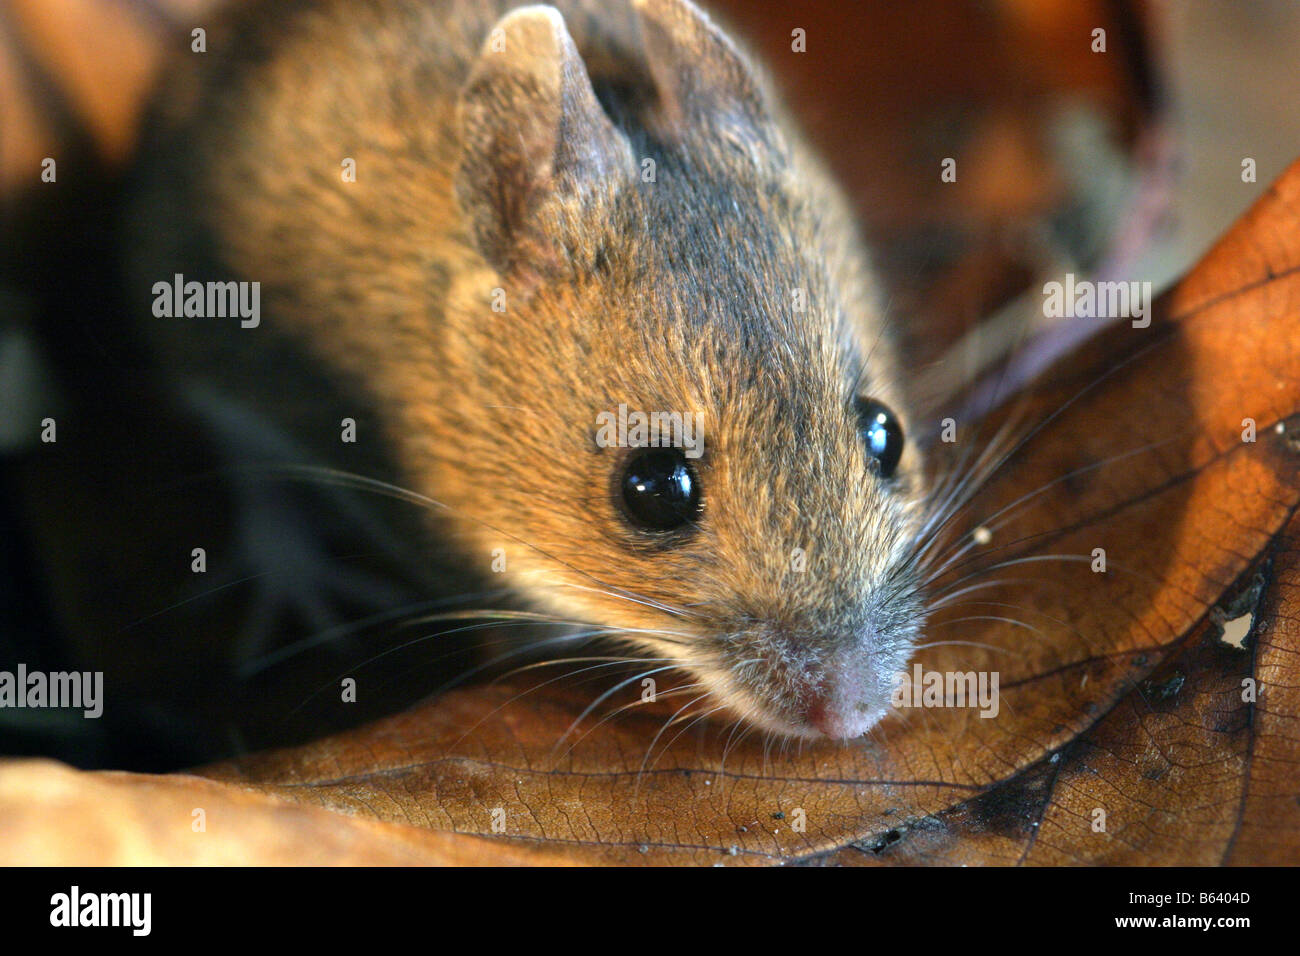 Woodmouse or long tailed field mouse apodemus sylvaticus amongst leaf litter in autumn Stock Photo